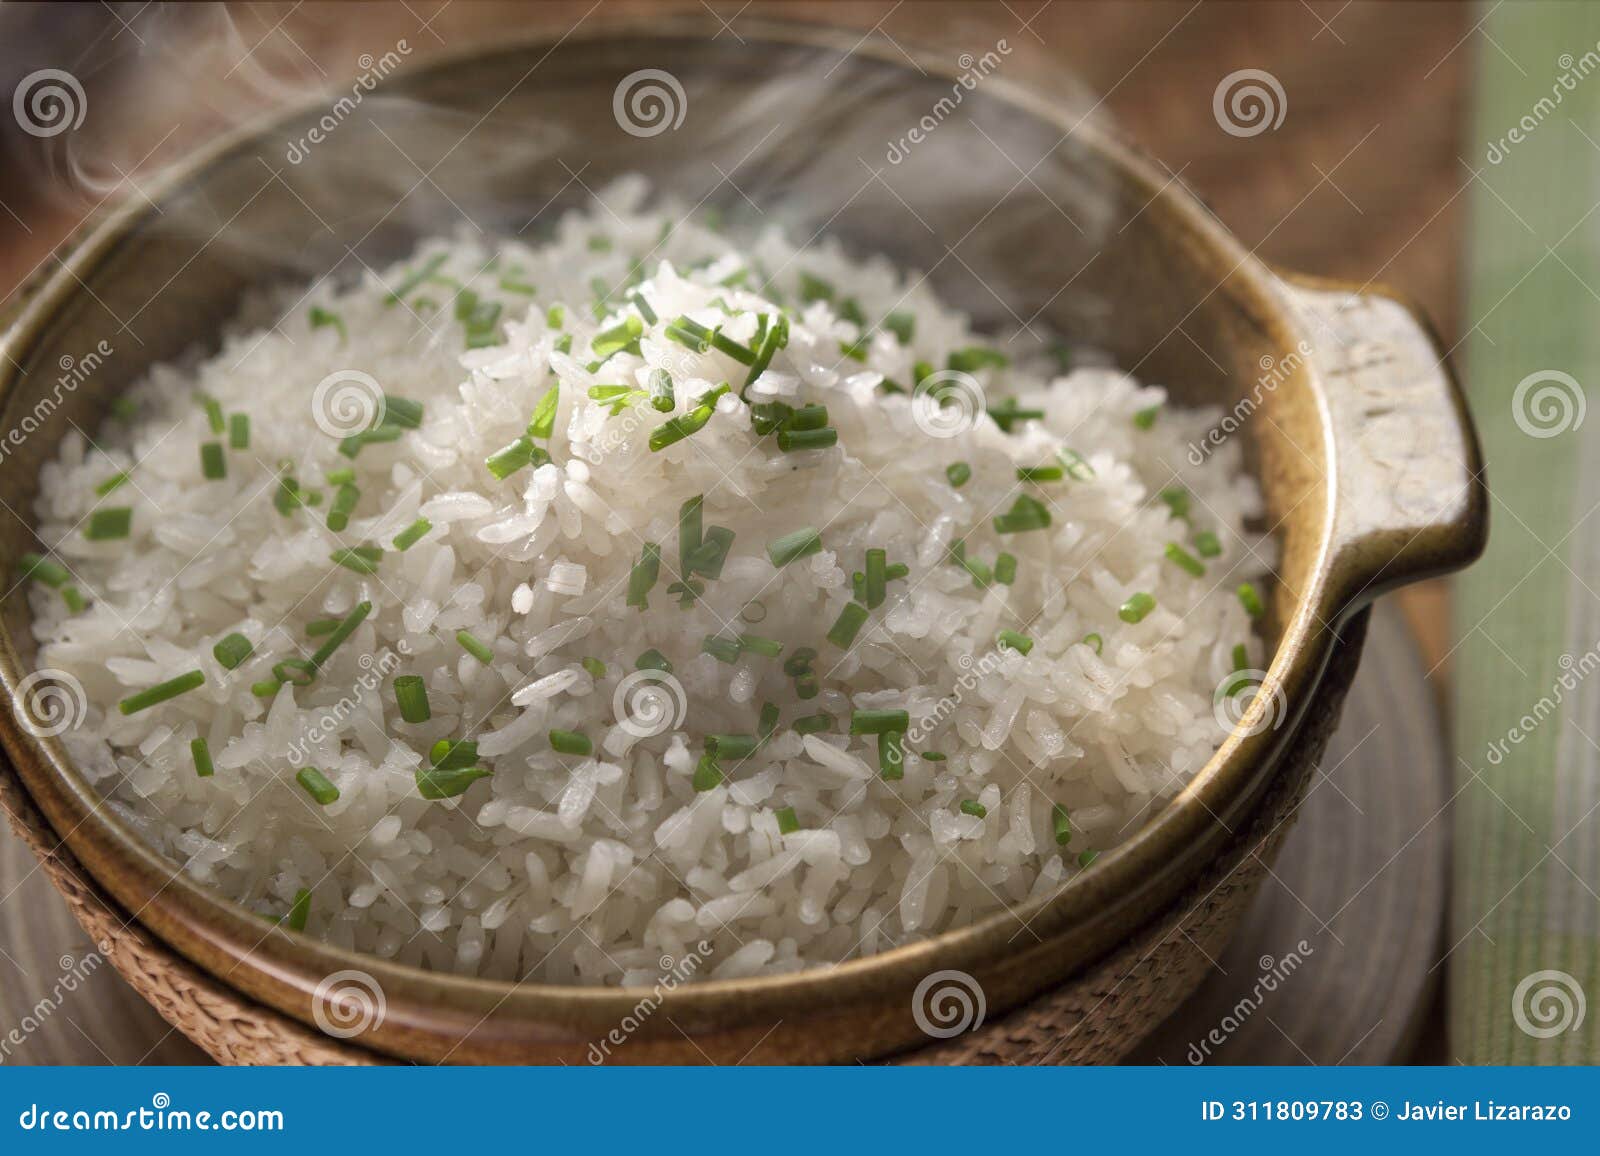 typical dish of hot rice with chives from colombia and latin america